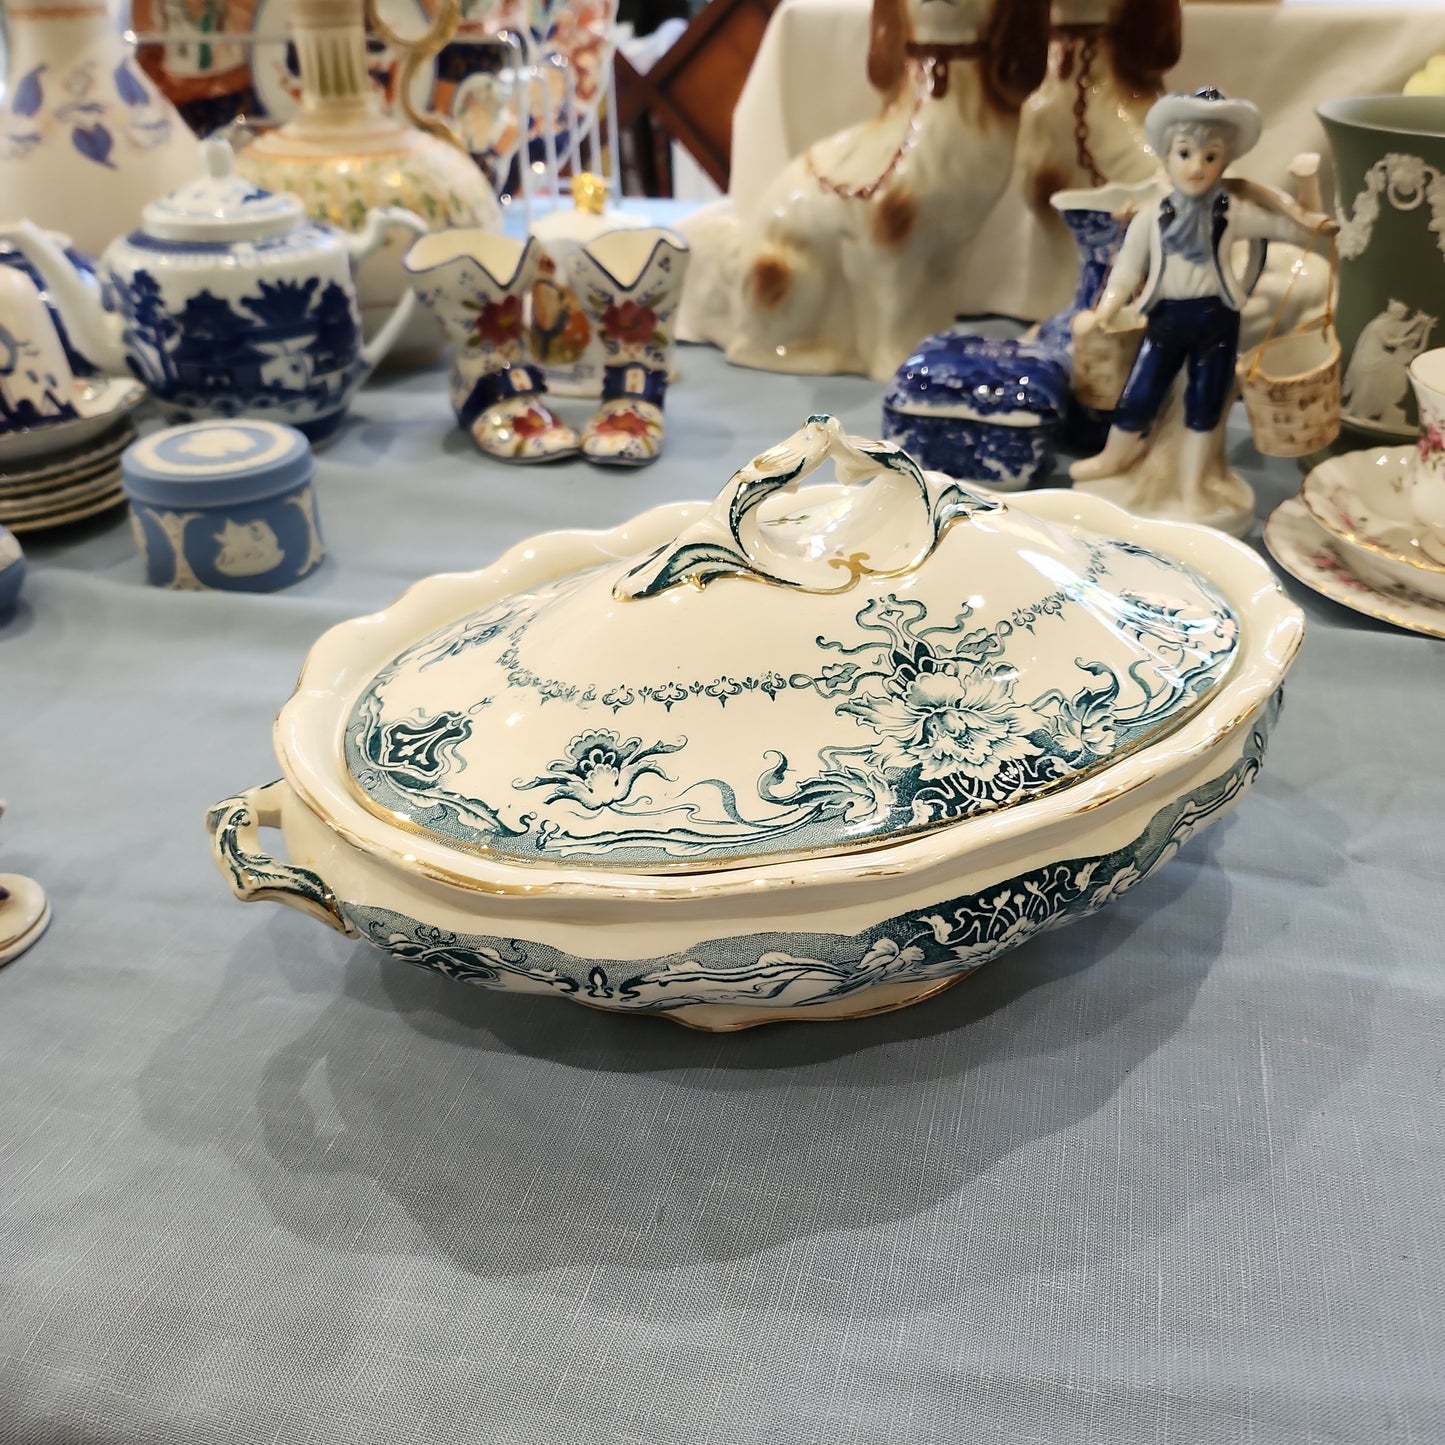 Antique Albion Melrose tureen - crazing in the bowl